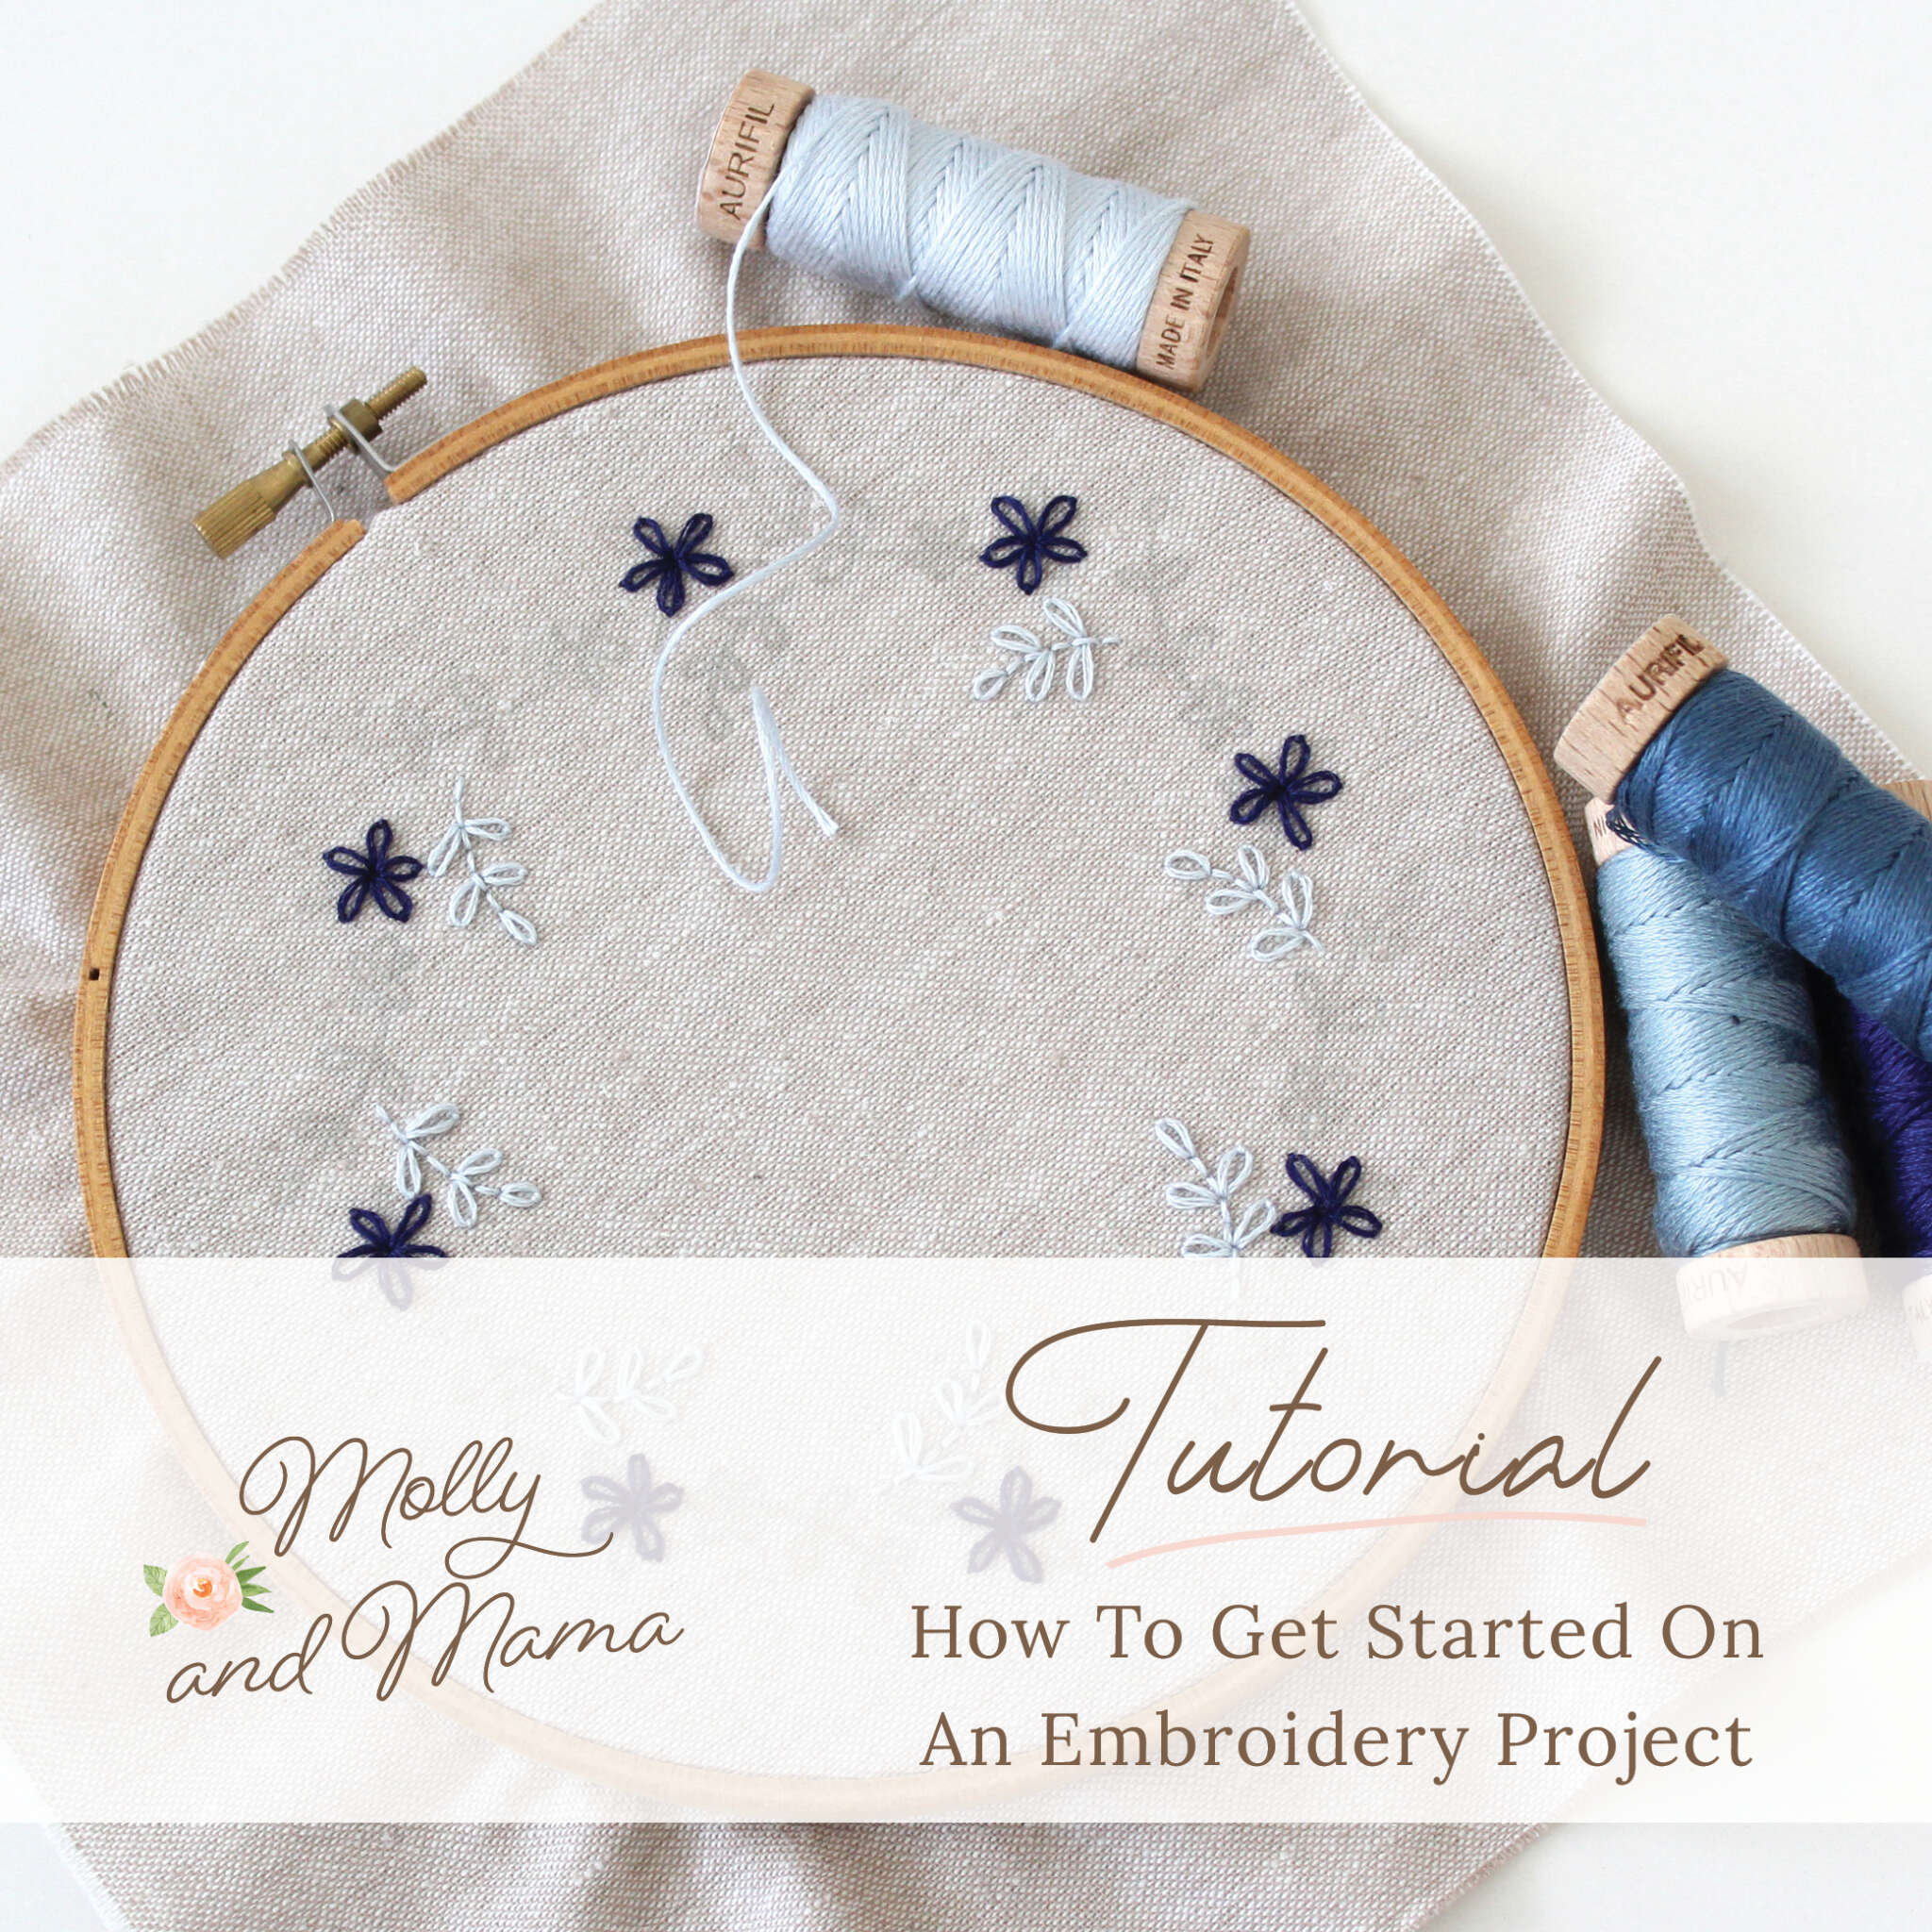 How To Get Started On An Embroidery Project